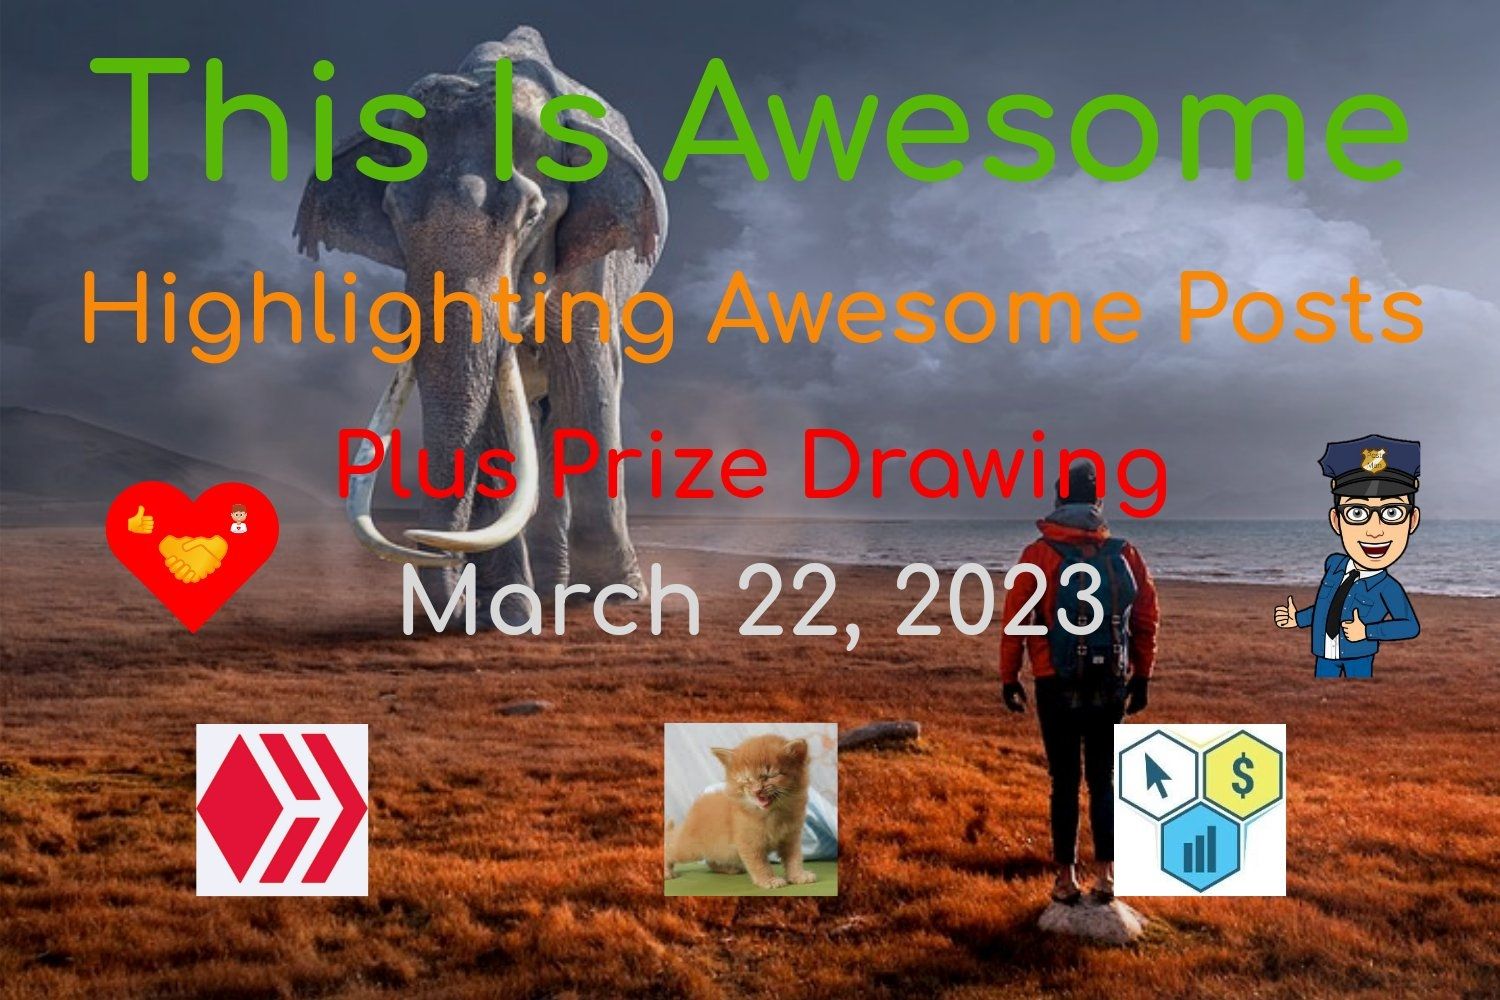 @thisisawesome/this-is-awesome-highlighting-awesome-posts-plus-prize-drawing-march-22-2023